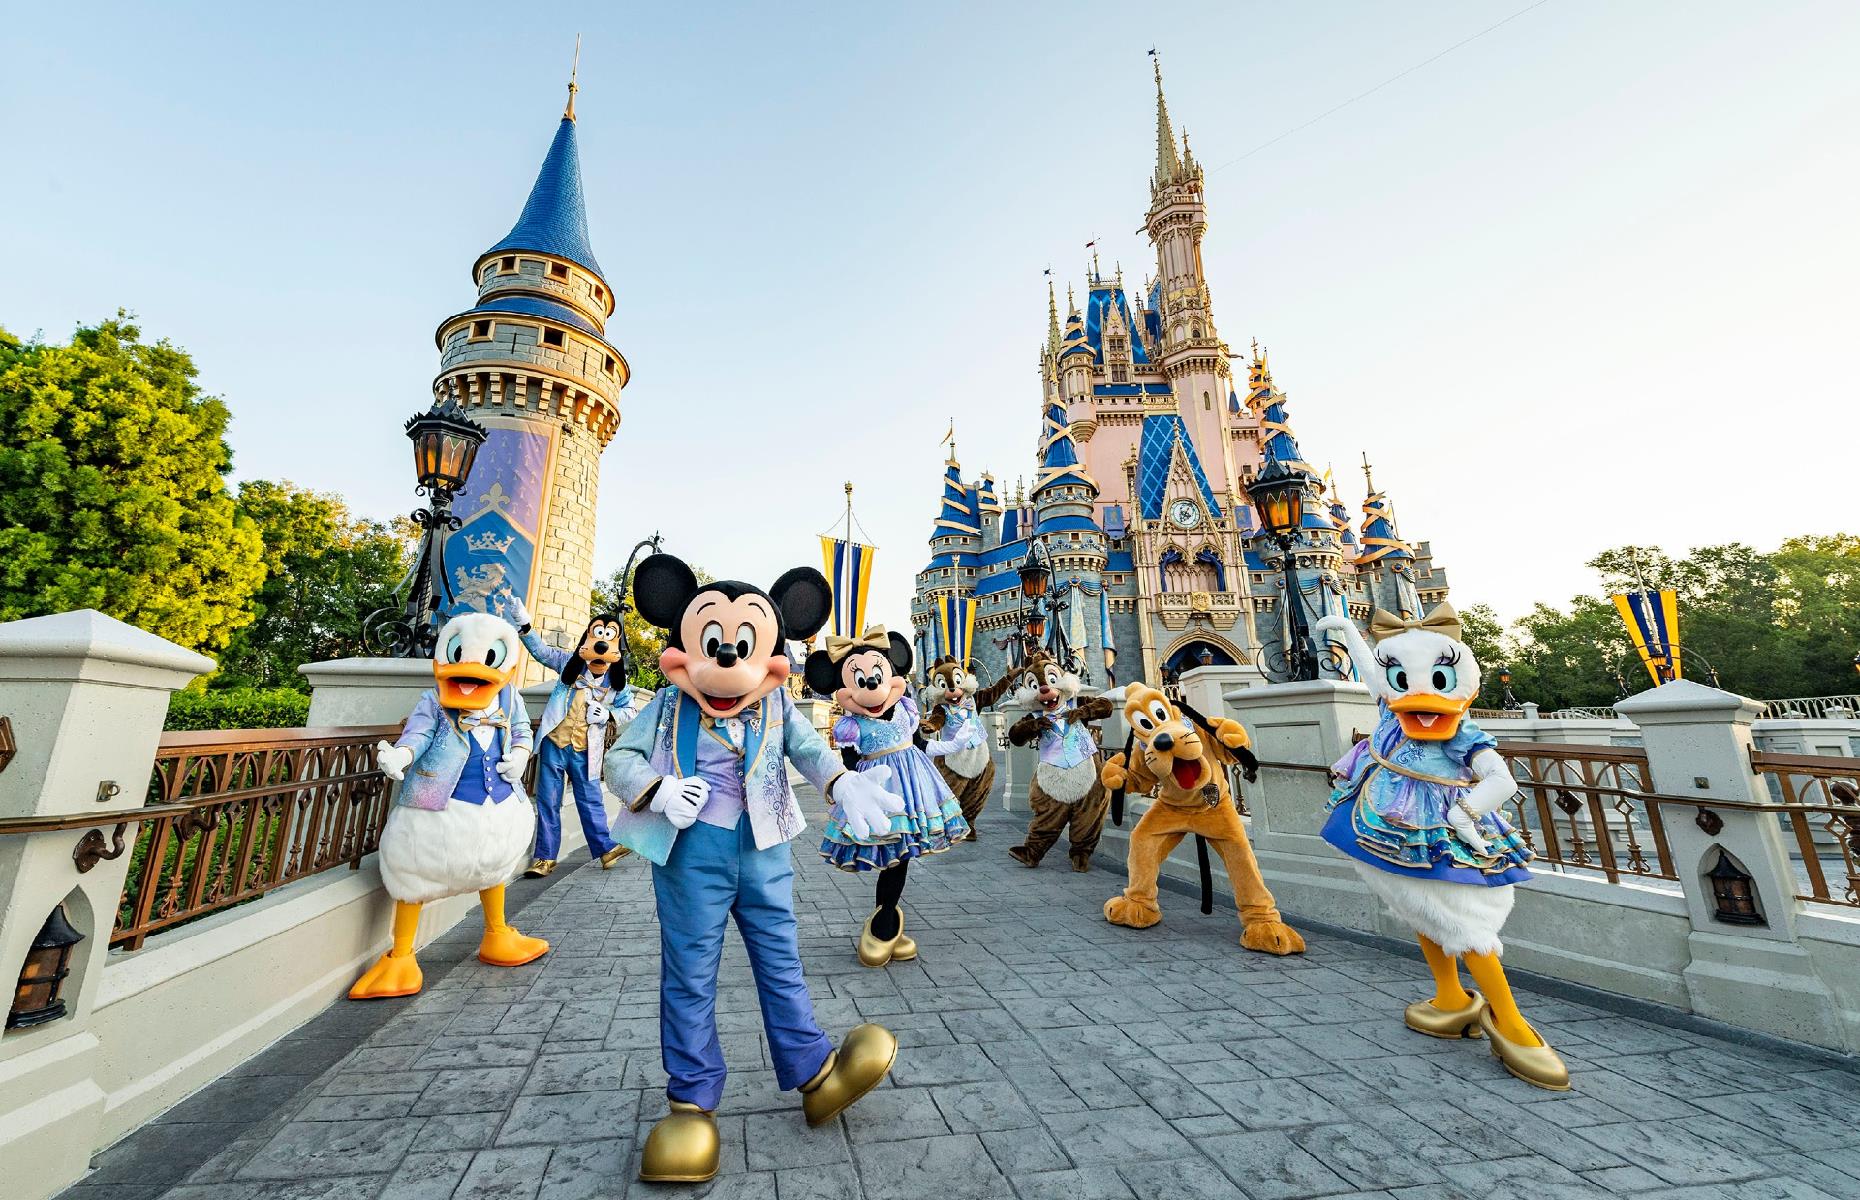 <p><a href="https://www.disneyworld.co.uk/">Walt Disney World Resort</a> has been immersing visitors in pure magic since 1971, and most people linger for longer than a day. Kids will adore Magic Kingdom, a theme park crammed full of fairy-tale rides, and Star Wars: Galaxy's Edge, which opened at Disney's Hollywood Studios in 2019. It’s all joyous, though, with a good mix of character encounters, gentler rides and white-knuckle roller coasters.</p>  <p><a href="https://www.loveexploring.com/galleries/83822/vintage-disney-pictures-parks-through-decades"><strong>Take a look at historic photos of Disney parks through the decades</strong></a></p>